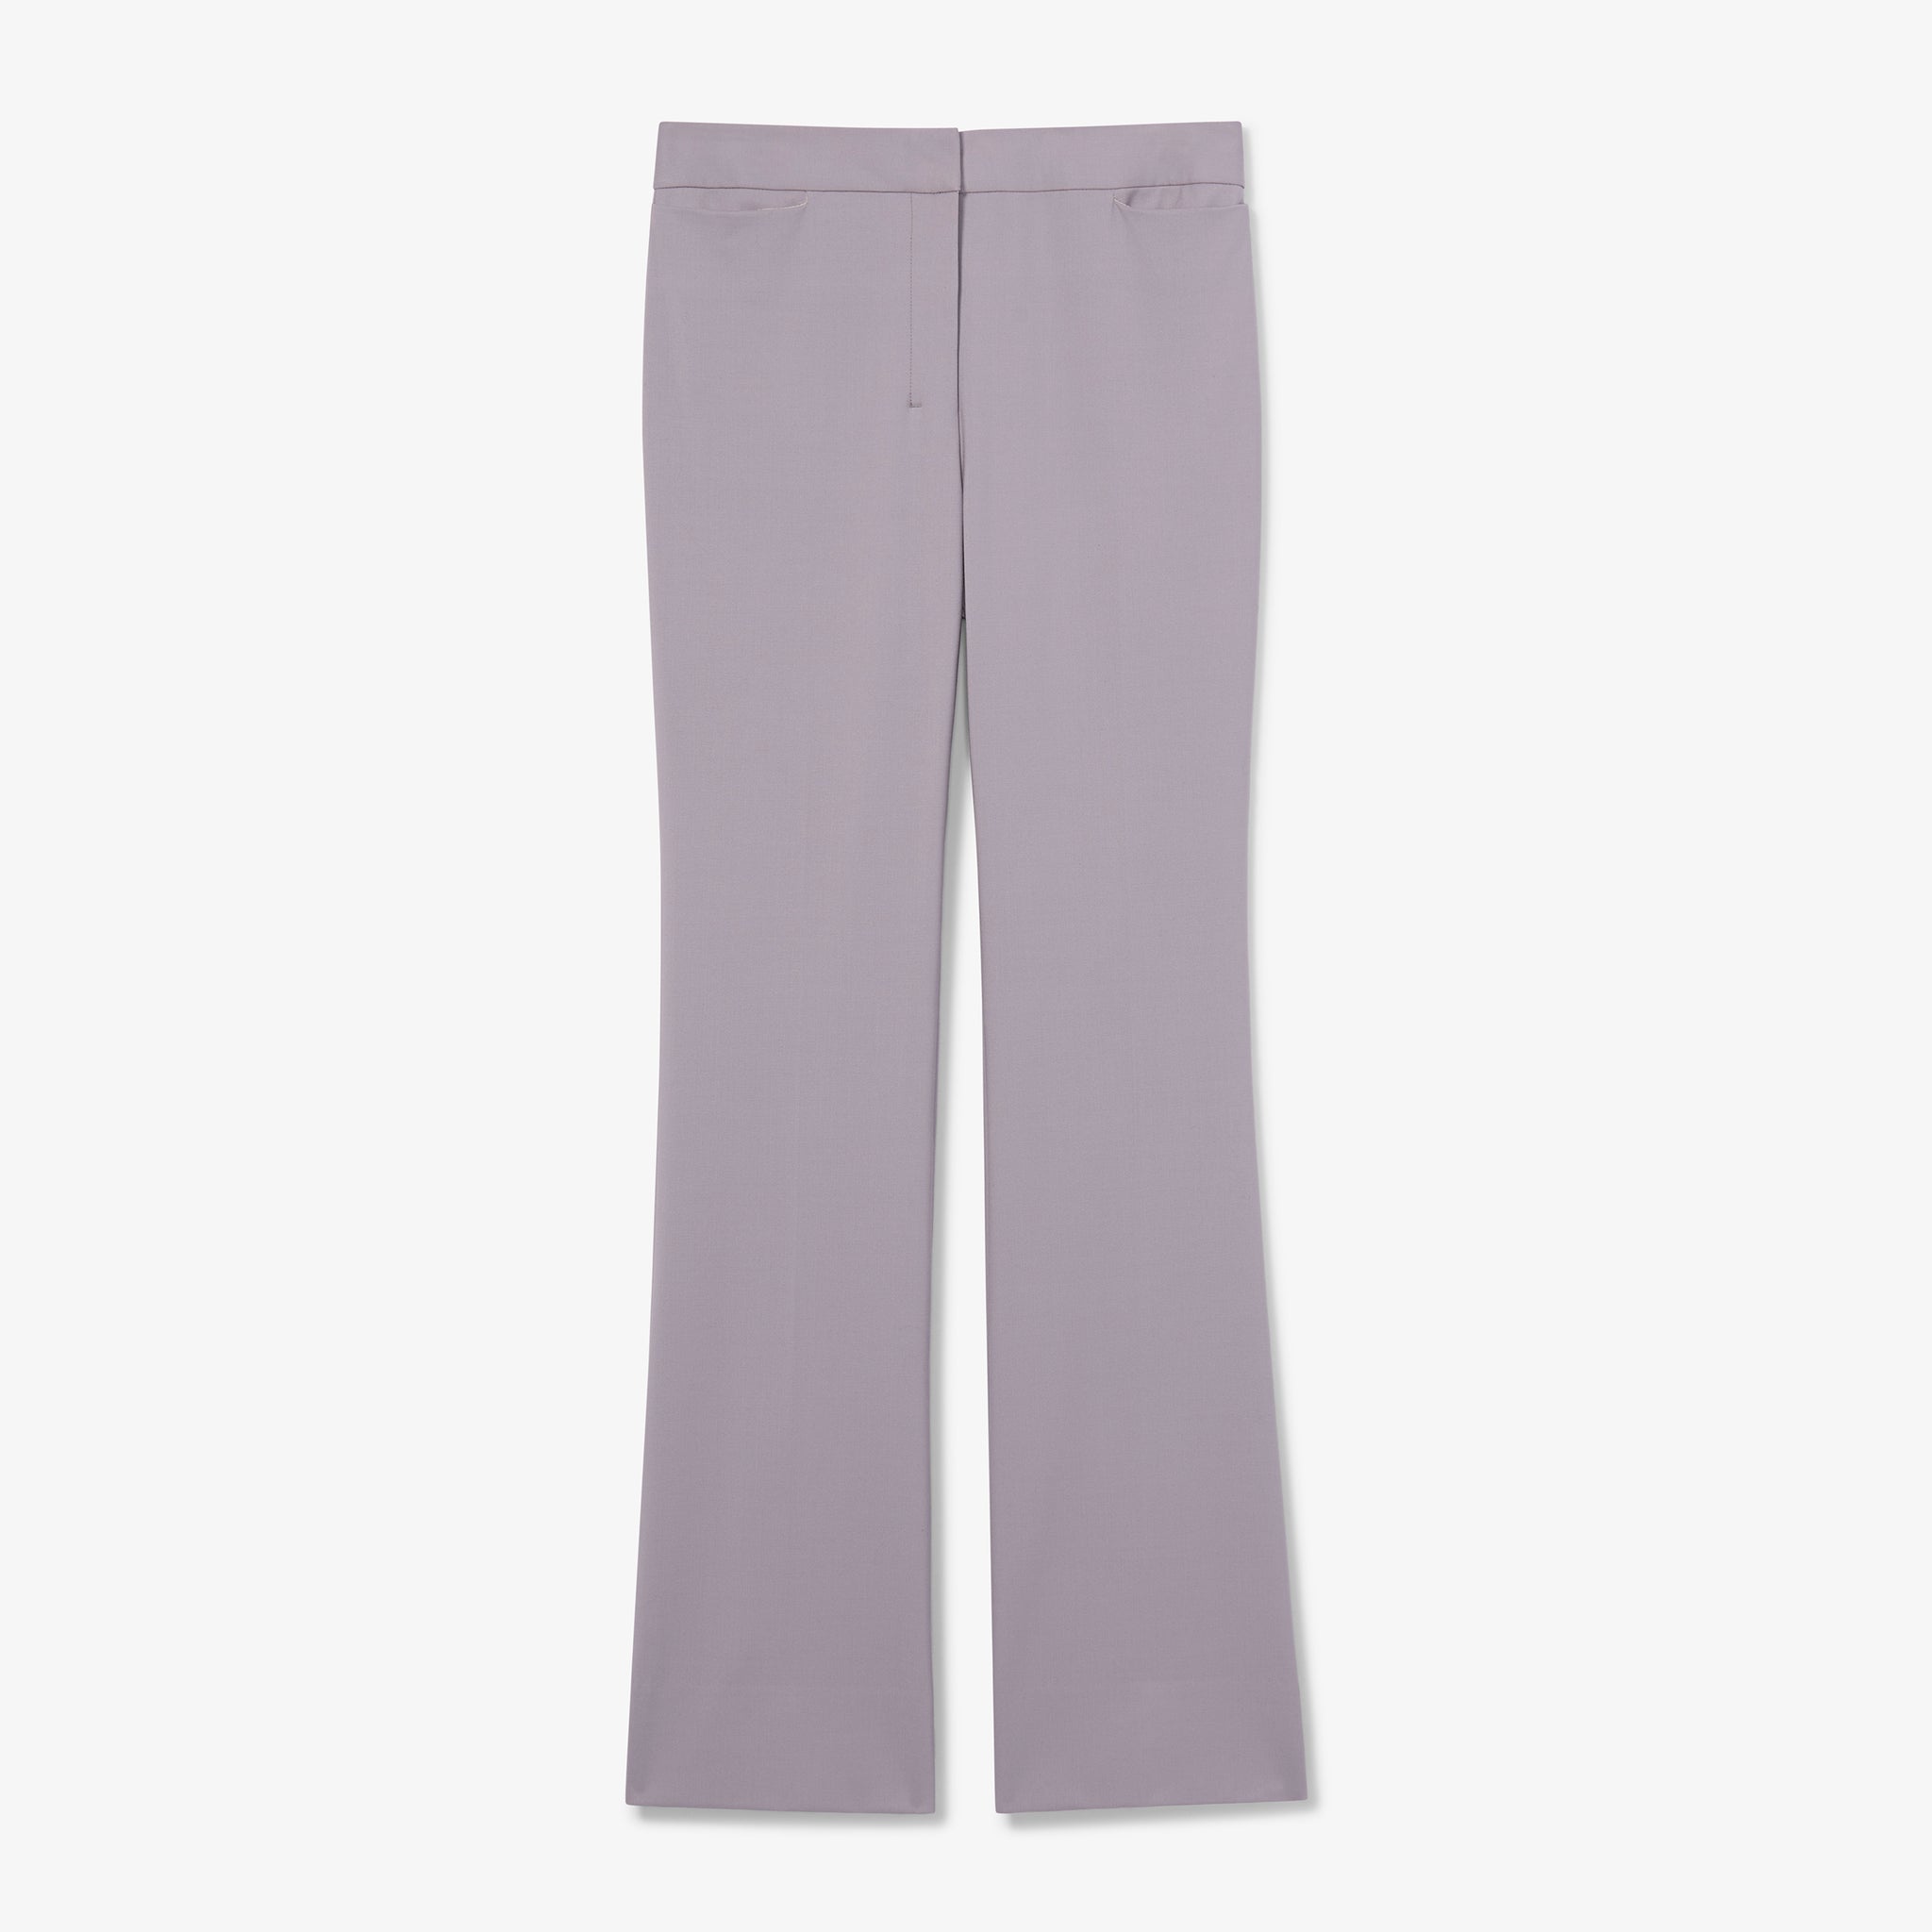 Packshot image of the Horton Pant - Washable Wool Twill in Light Lilac